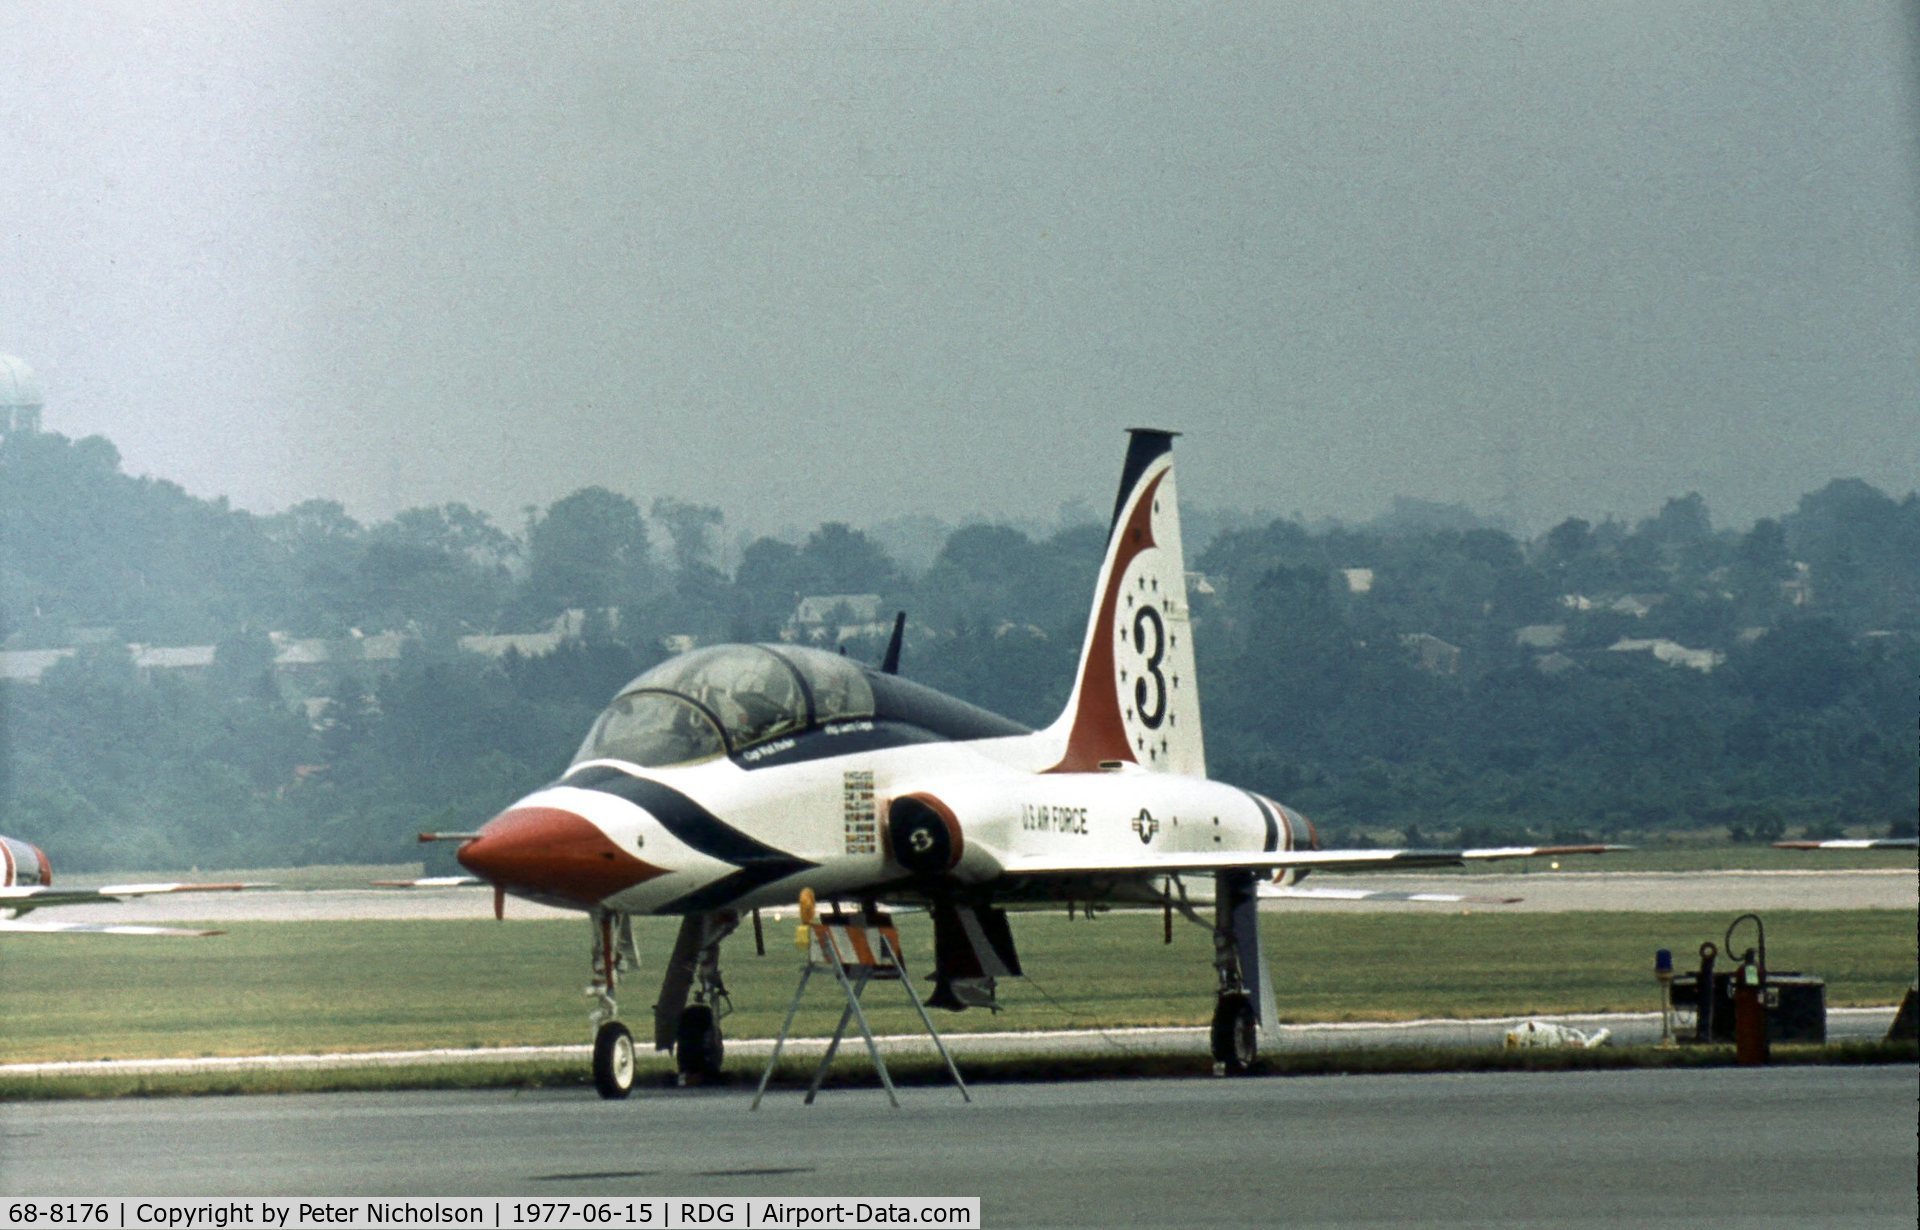 68-8176, Northrop T-38A Talon C/N T.6181, Thunderbird number 3 at the 1977 Reading Airshow.